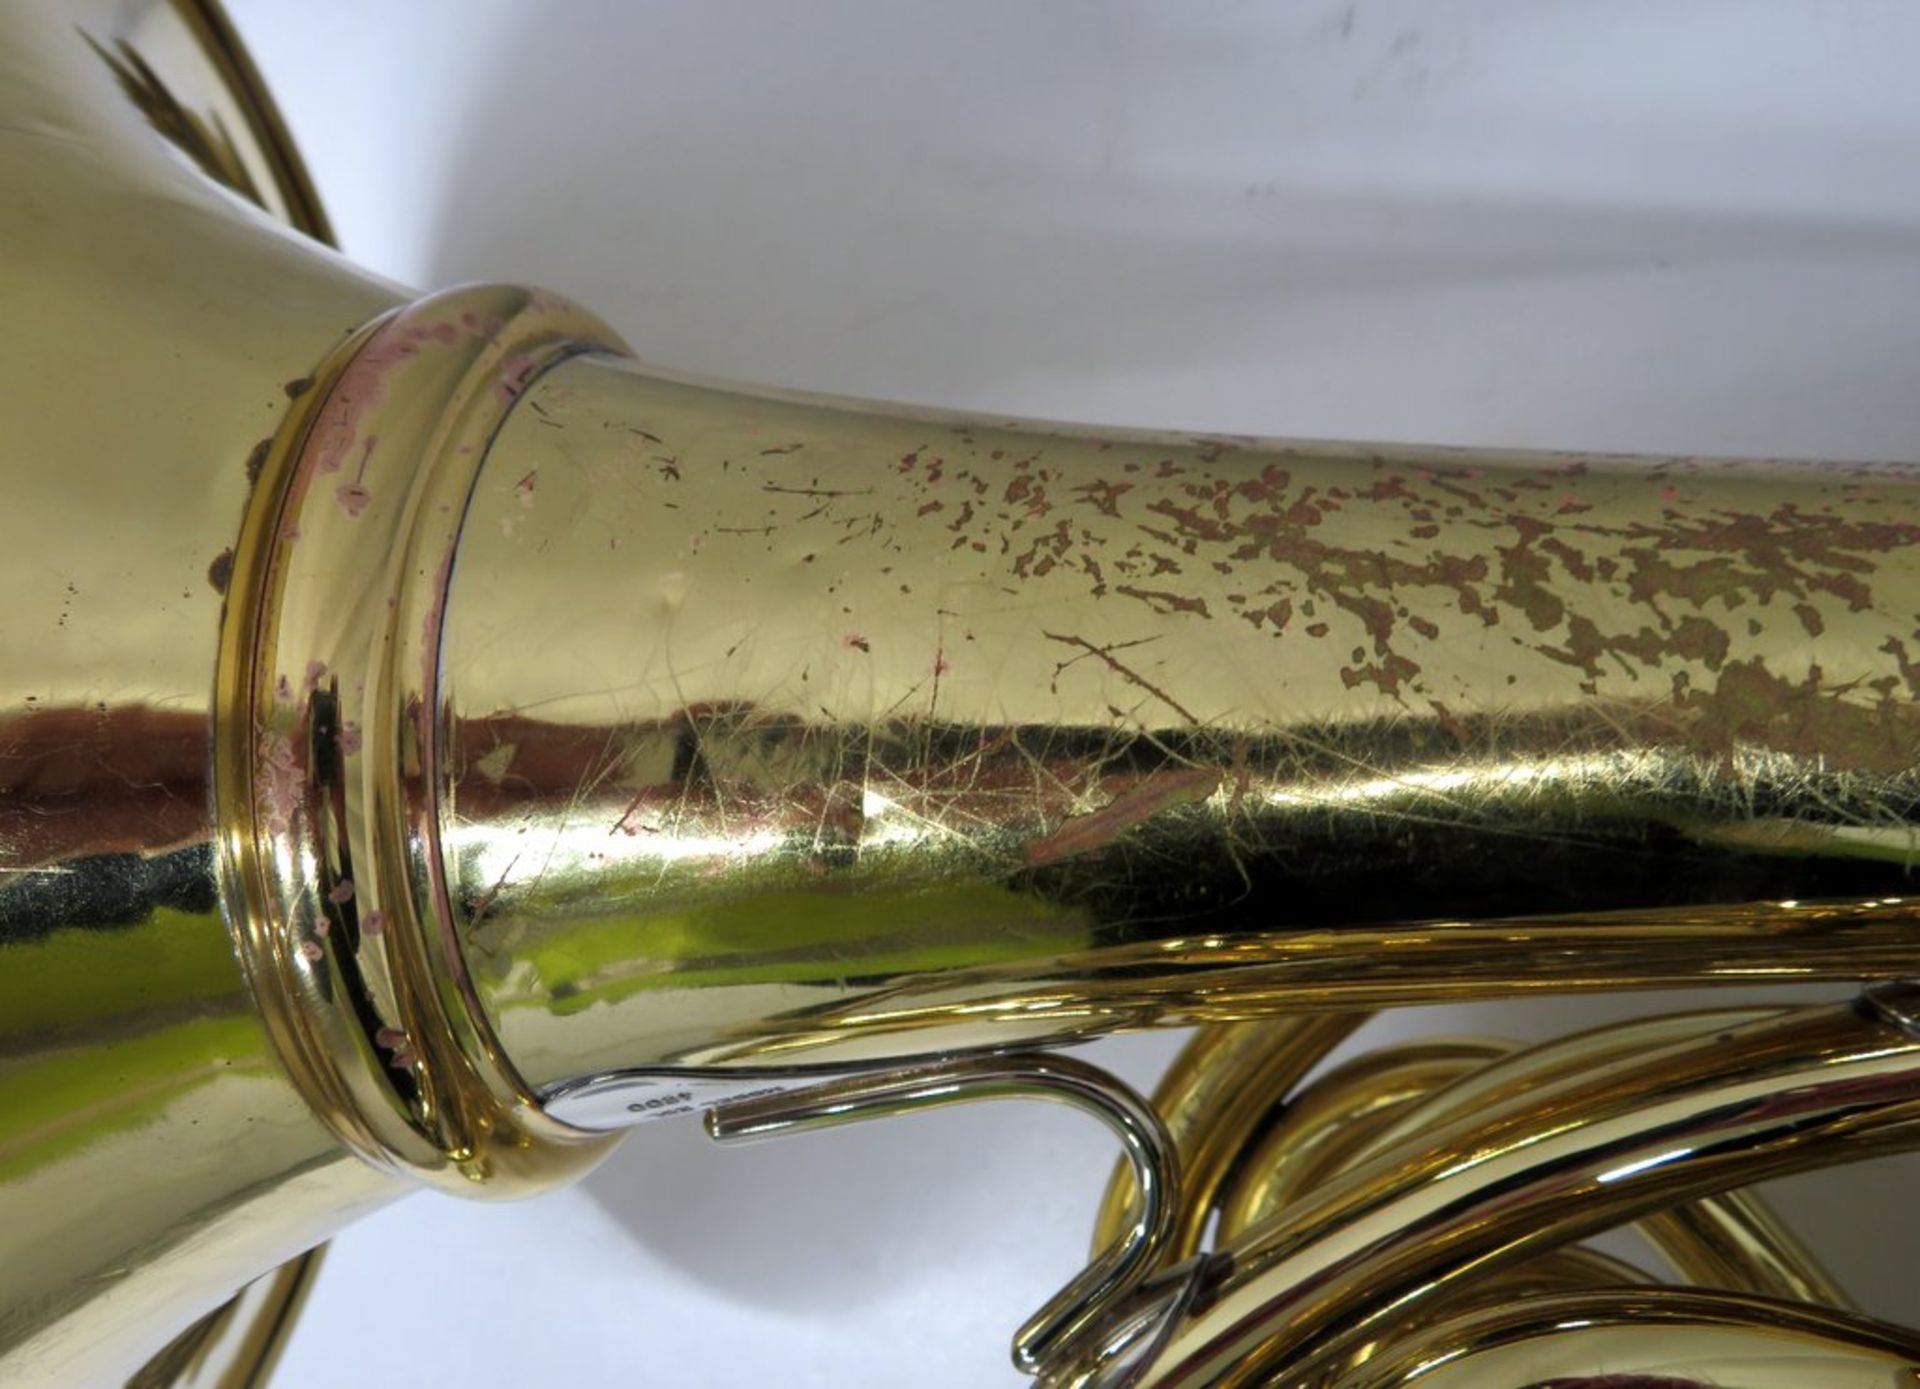 Paxman 25L Horn With Case. Serial Number: 4800. Please Note This Item Has Not Been Tested - Image 12 of 19